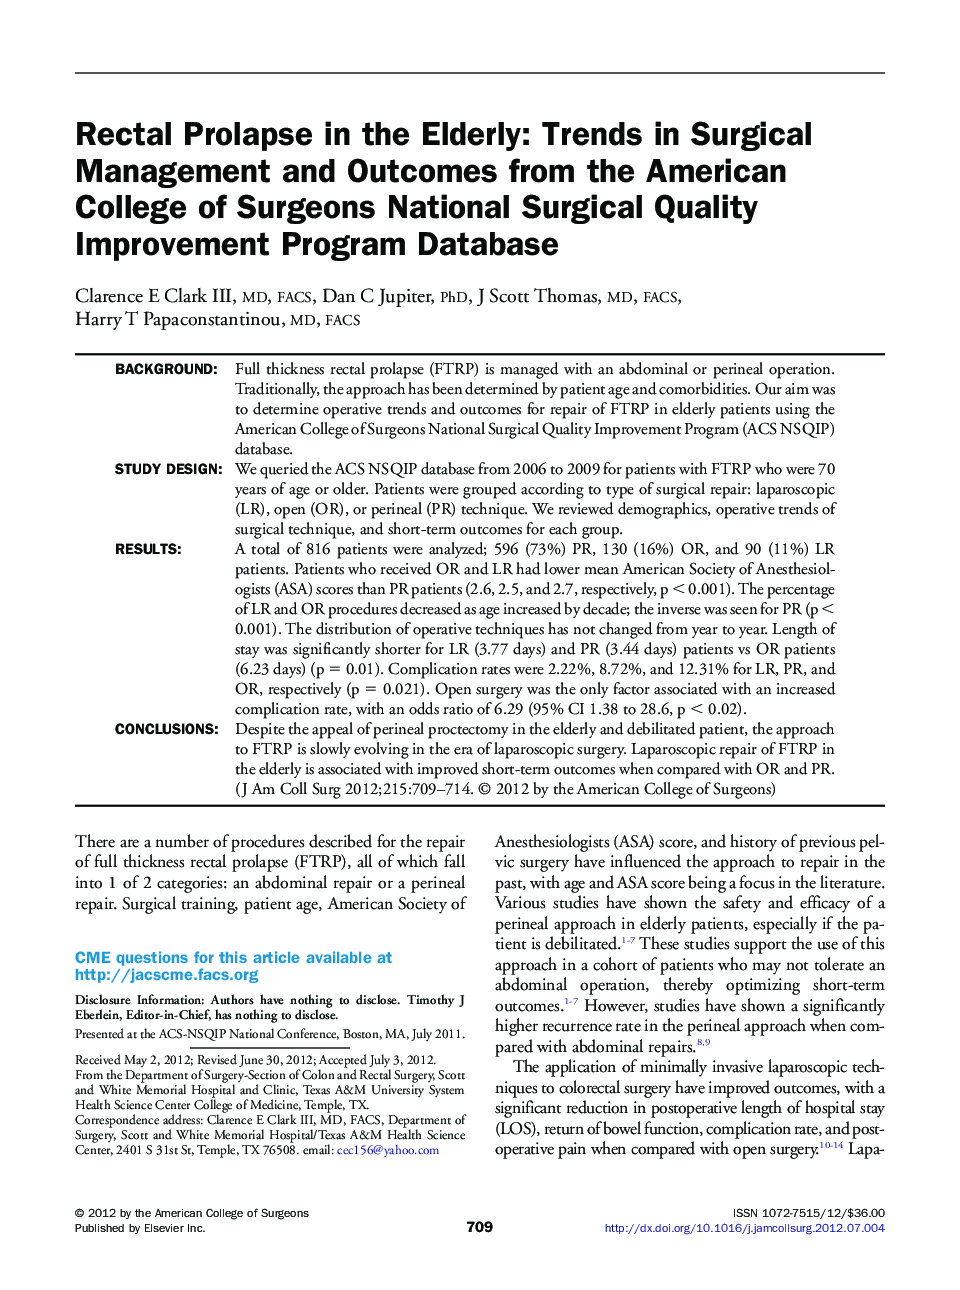 Rectal Prolapse in the Elderly: Trends in Surgical Management and Outcomes from the American College of Surgeons National Surgical Quality Improvement Program Database 